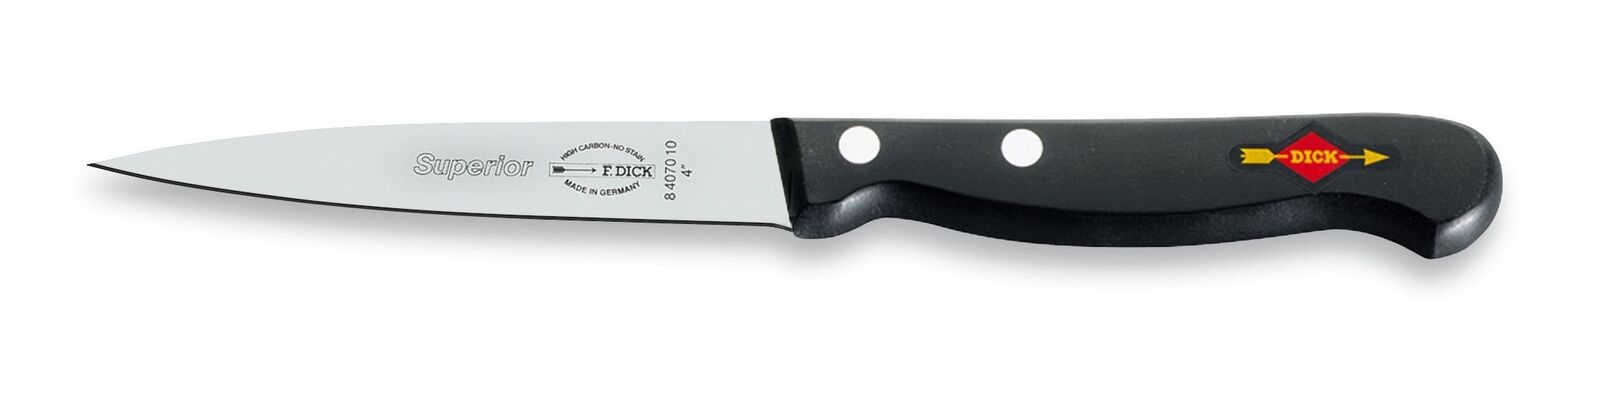 F. Dick (8407010) 4" Kitchen Knife, Stamped-cityfoodequipment.com